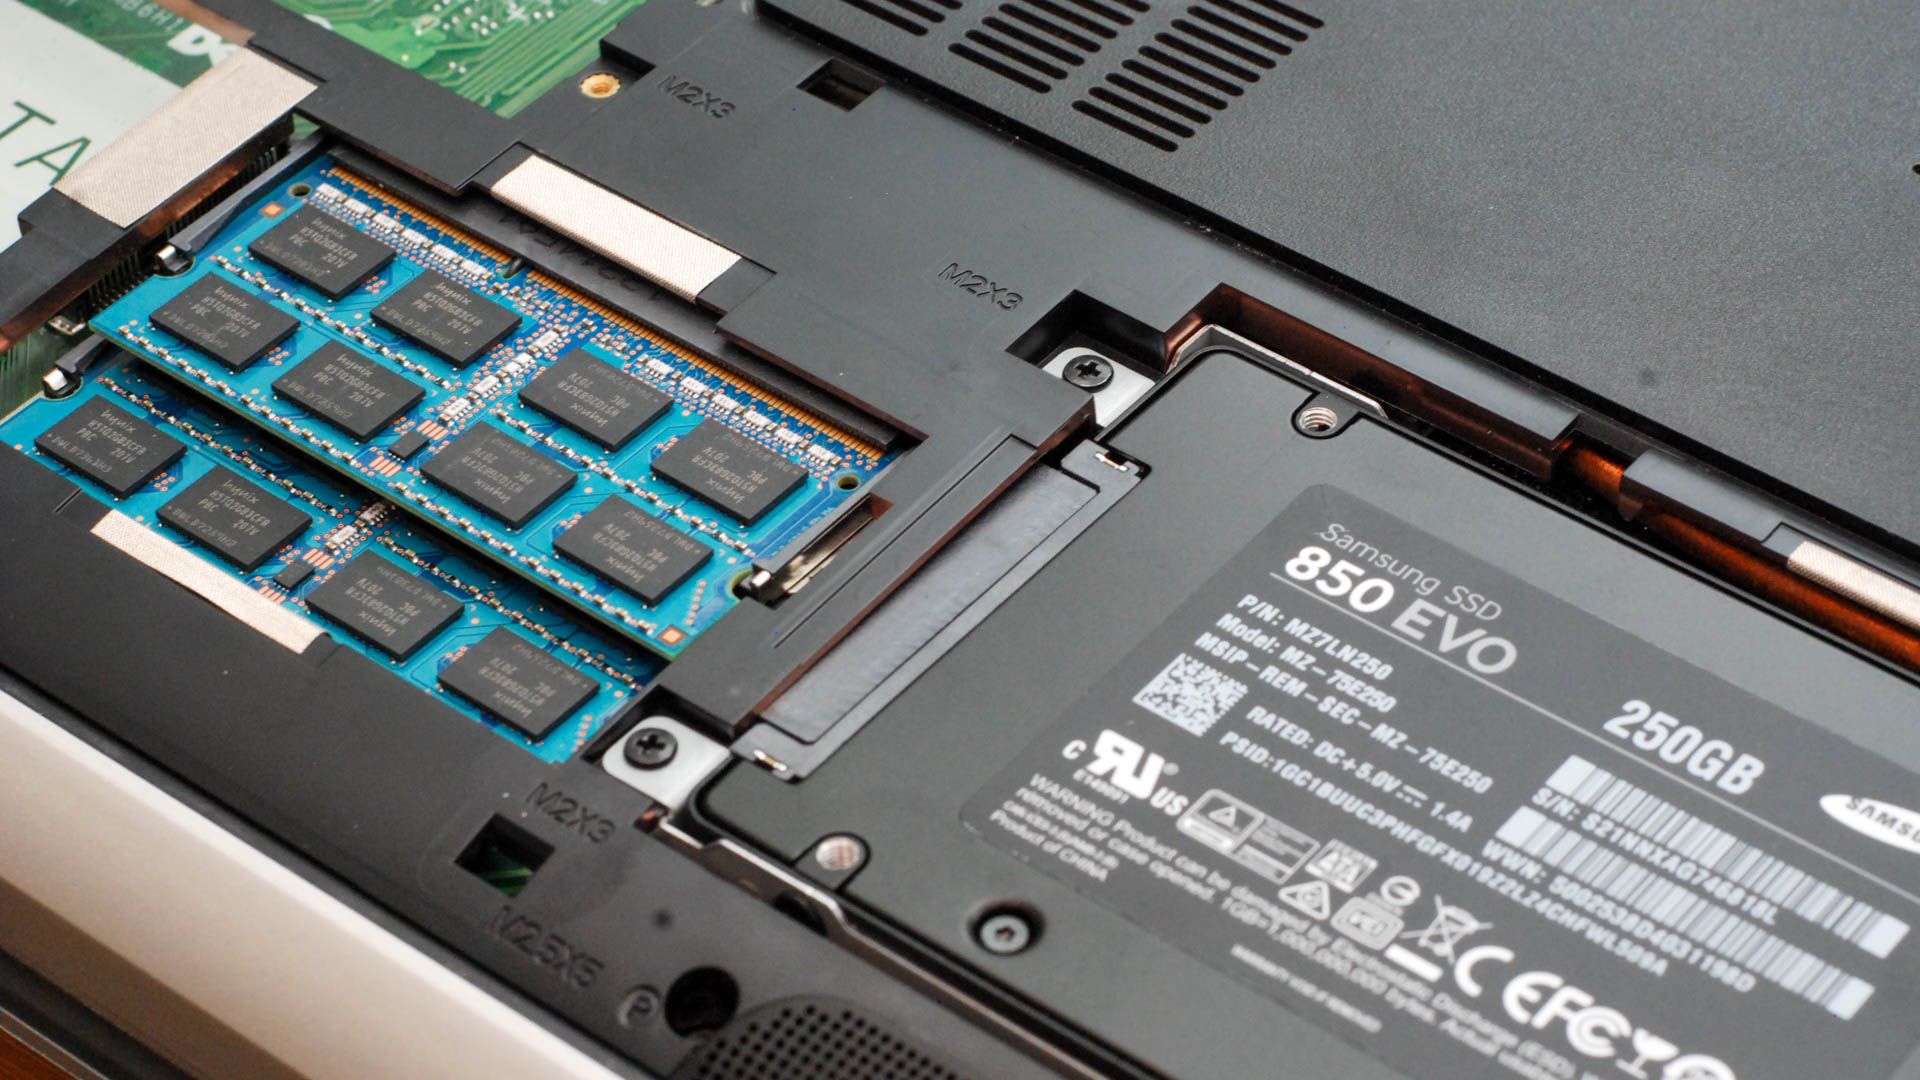 SSD and Ram in a laptop.